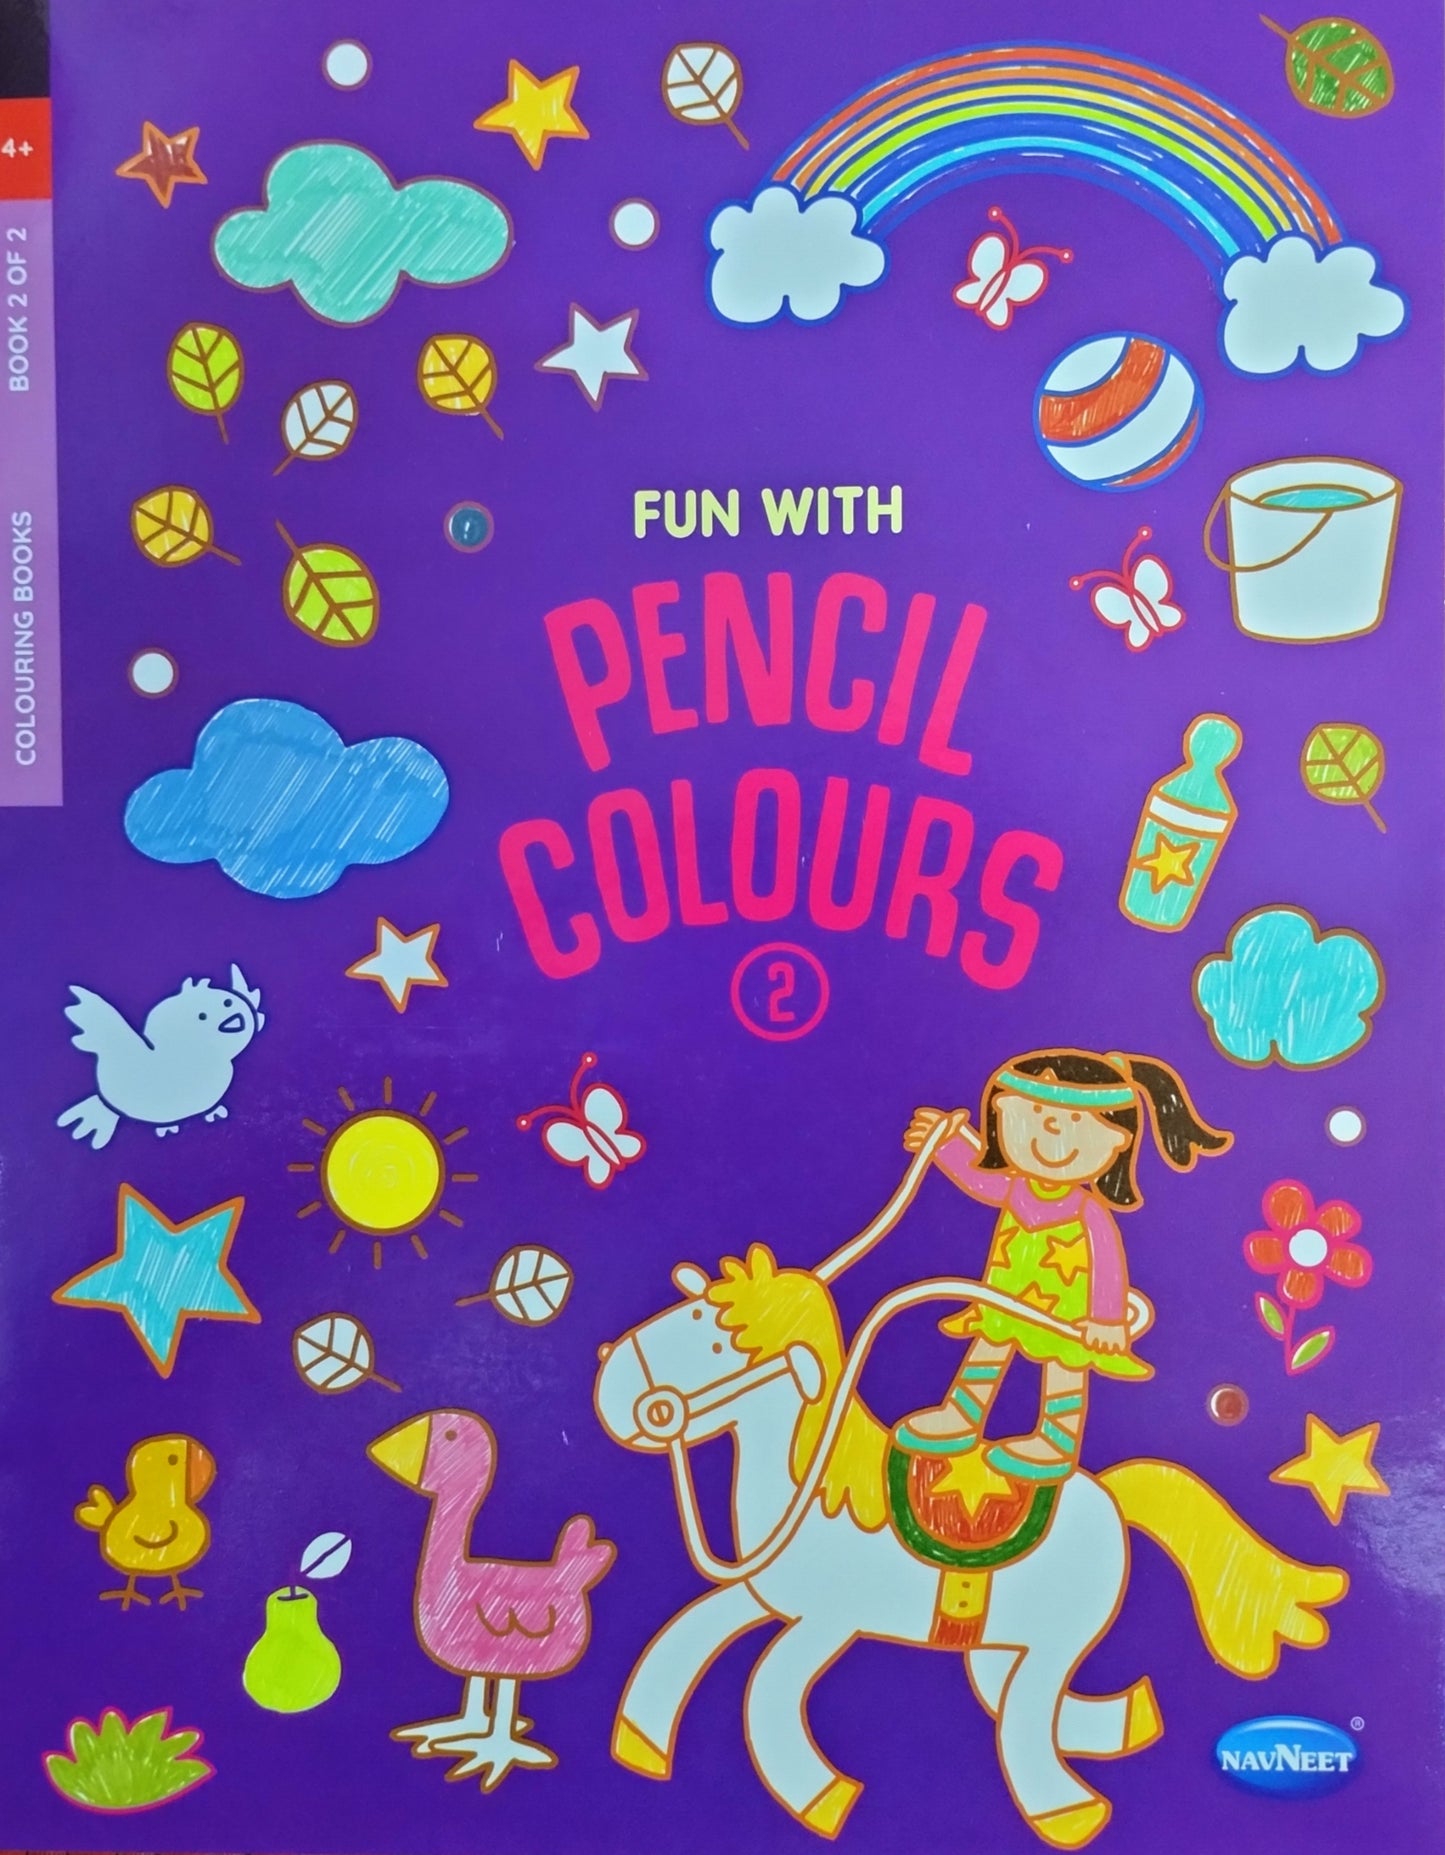 Navneet Fun With Pencil Colours 2